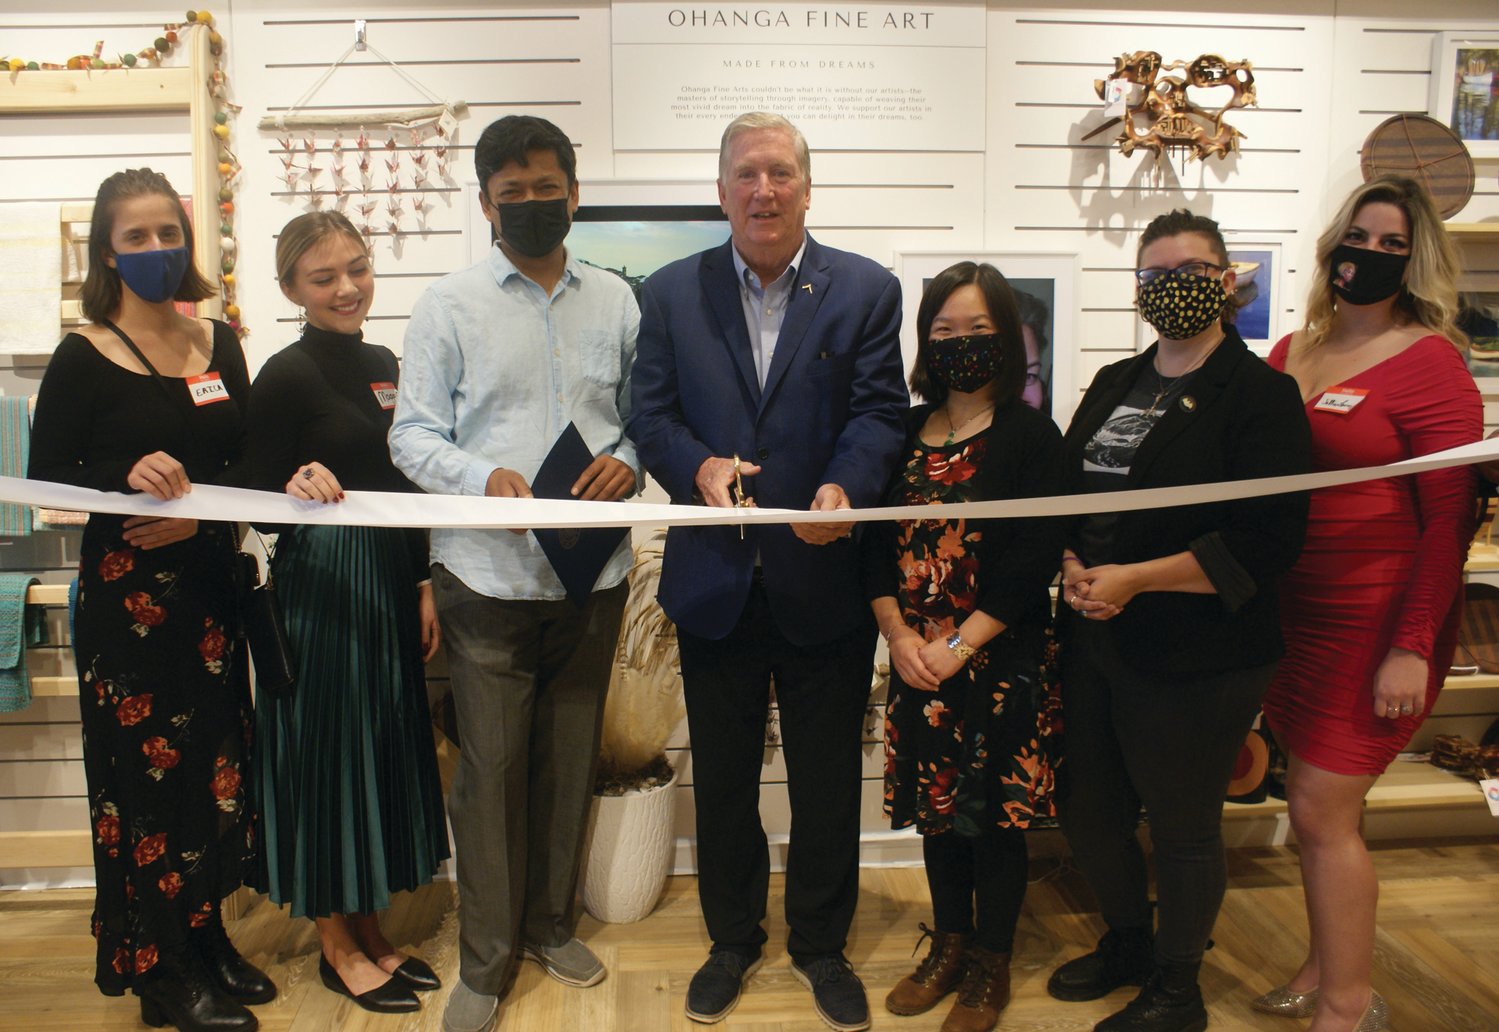 WELCOME TO CRANSTON: Mayor Ken Hopkins recently welcomed Ohanga to Garden City Center. Pictured are Erica Macri, director of marketing; Margherita Bassi, director of creative content; Subham Sett, co-founder; Hopkins; Yuping Wang, co-founder; Kristen Bezner, store manager; and Jillian Lauren, artist and marketing manager.